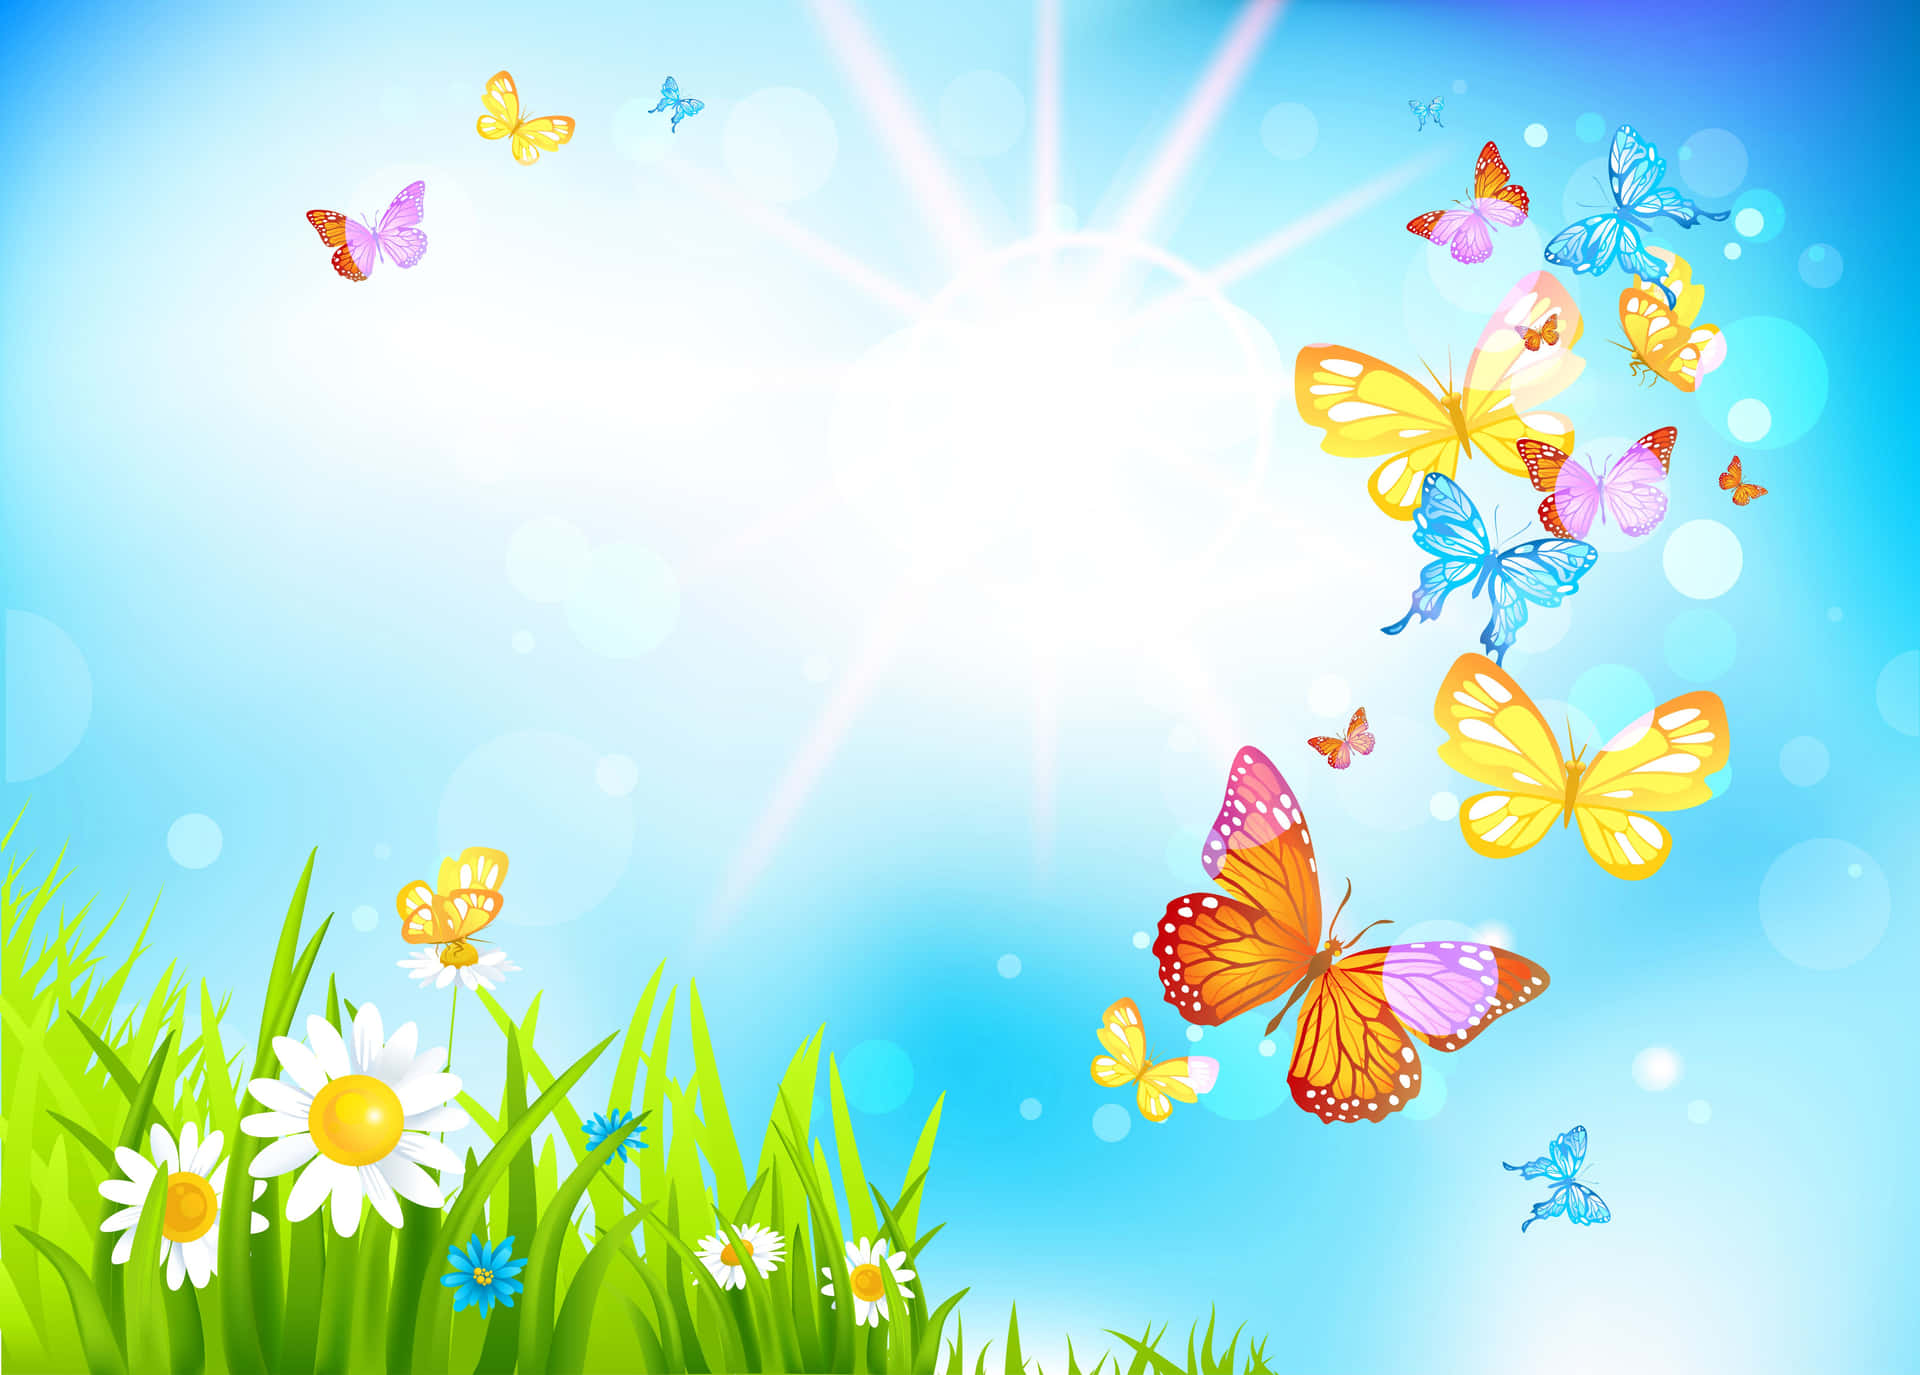 An enchanting spring scene with vibrant butterflies fluttering over blossoming flowers Wallpaper